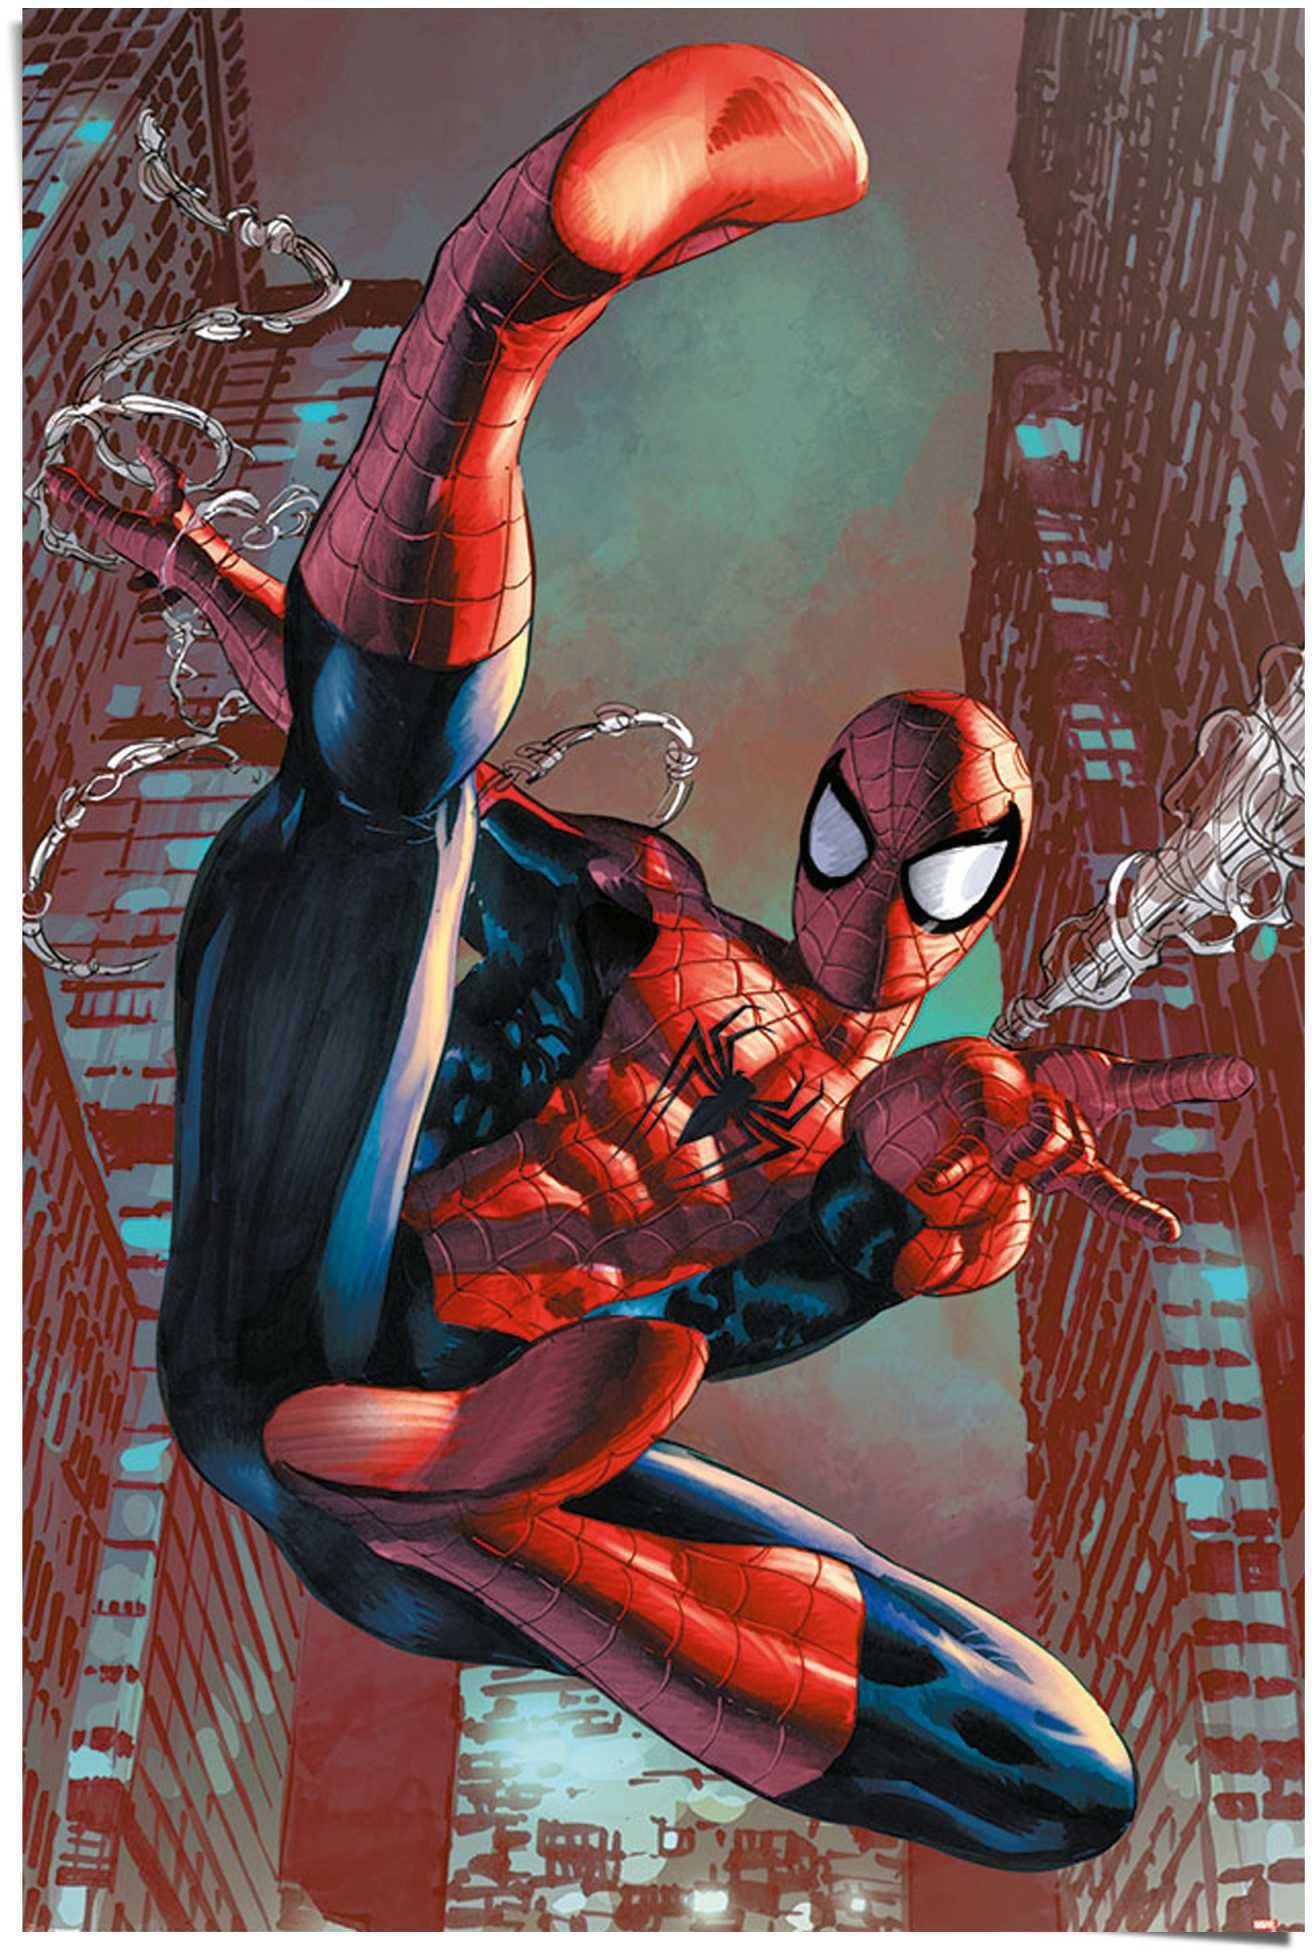 (1 St) Comic Poster Reinders! Poster Spider-Man,